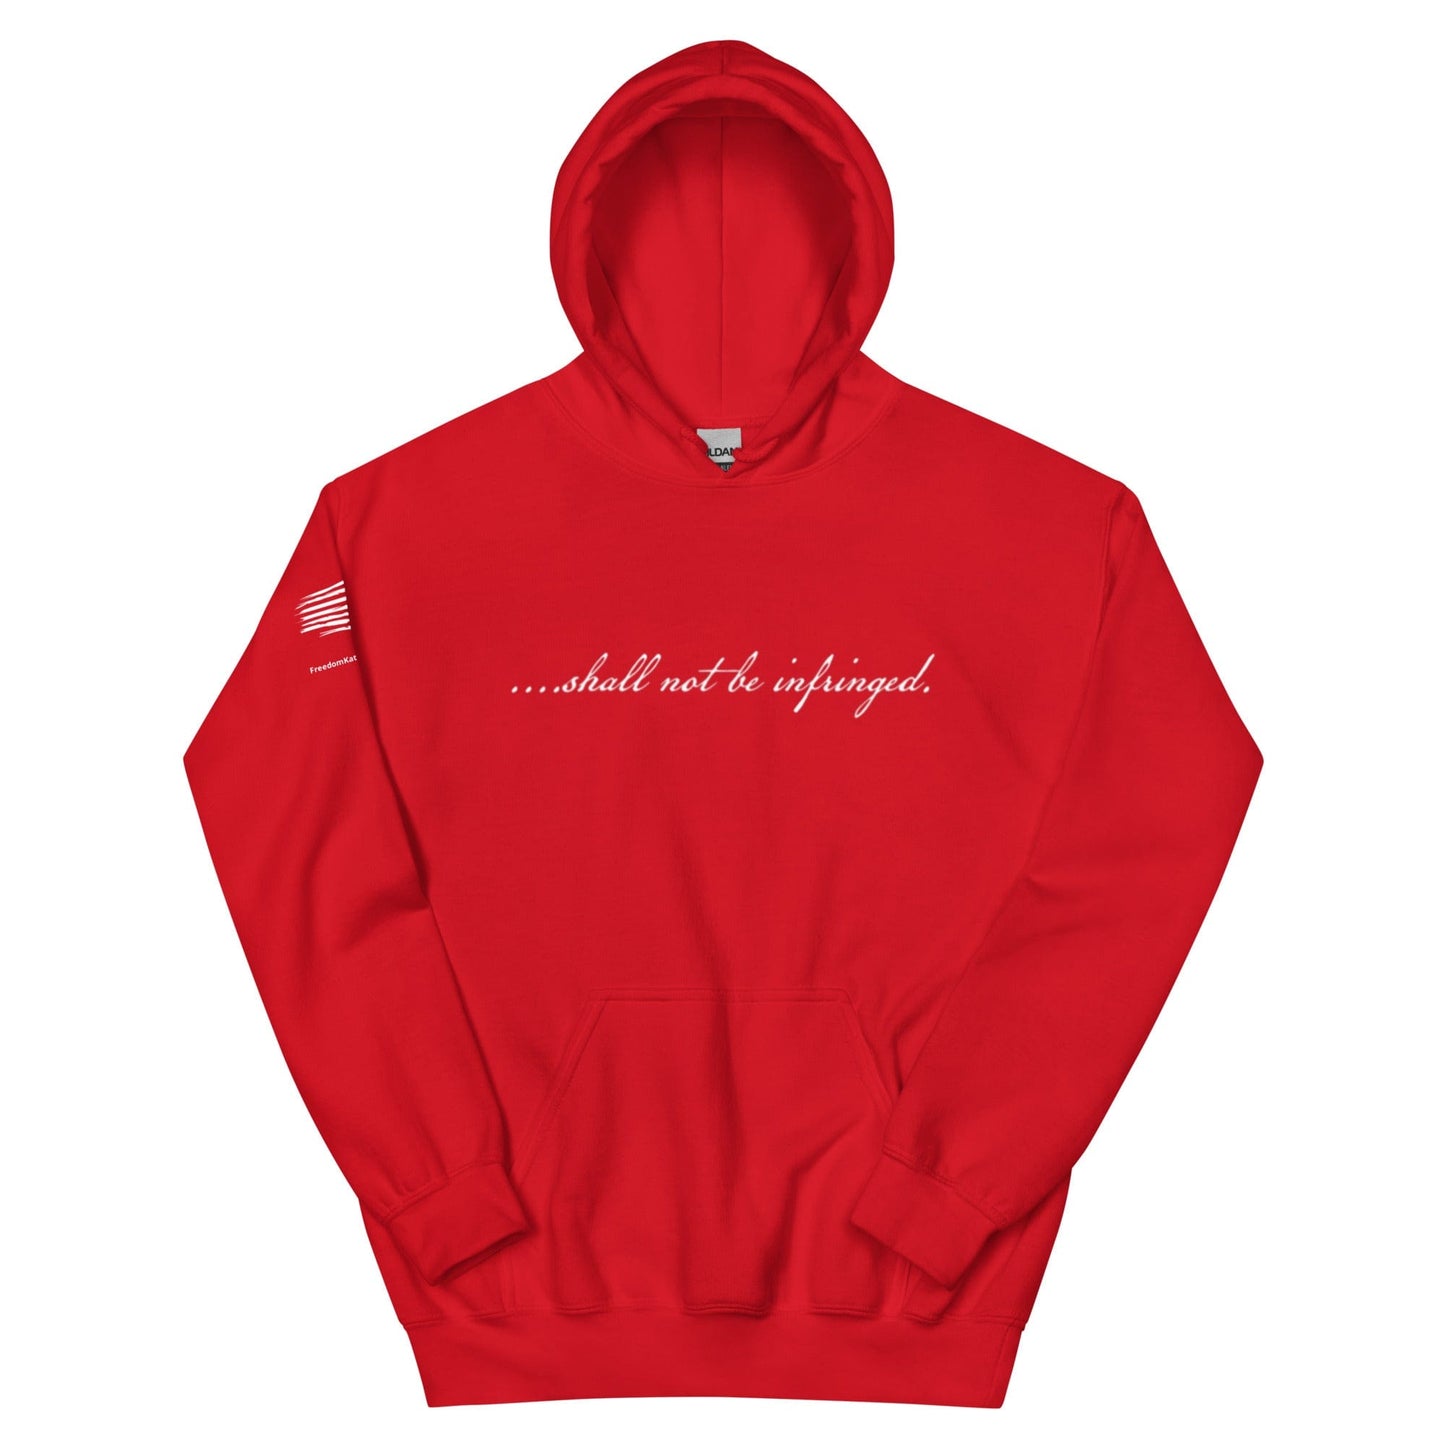 FreedomKat Designs Hoodie Red / S Shall Not Be Infringed Hoodie